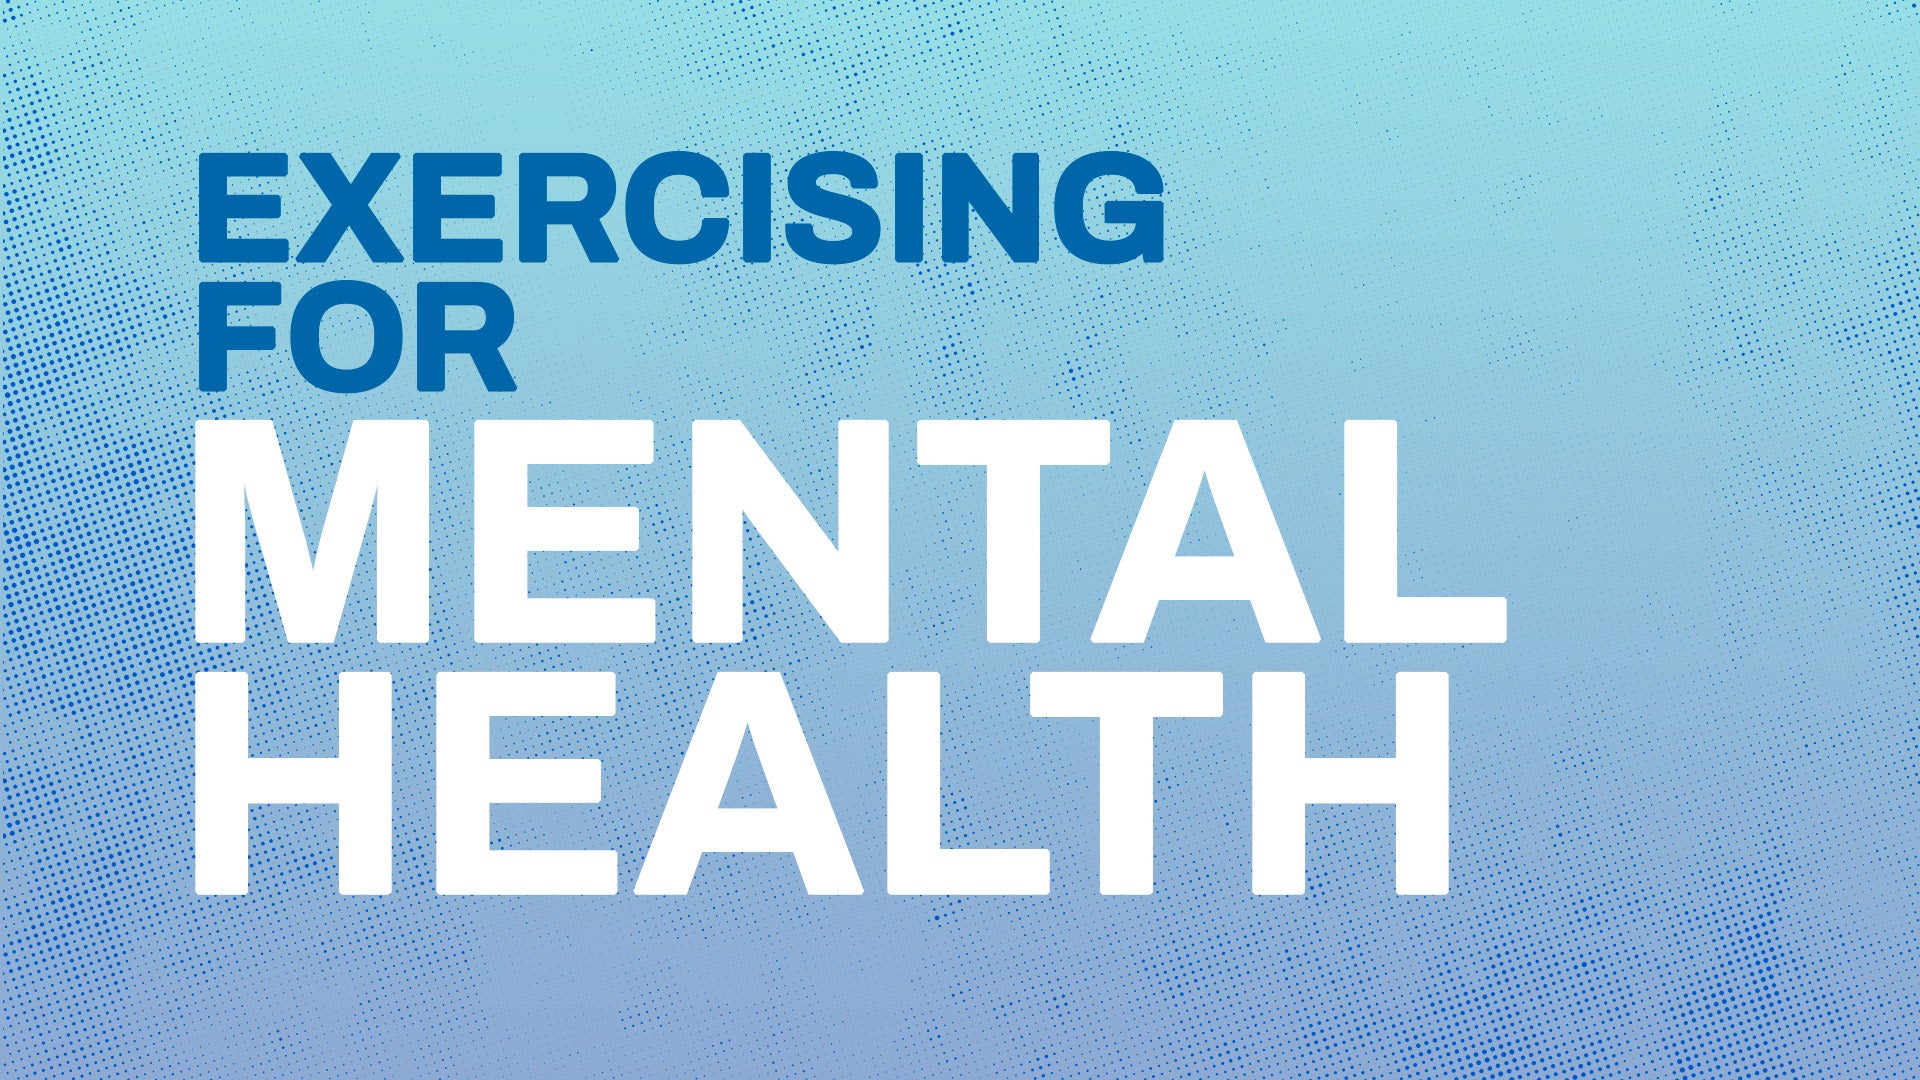 Exercising & Your Mental Health